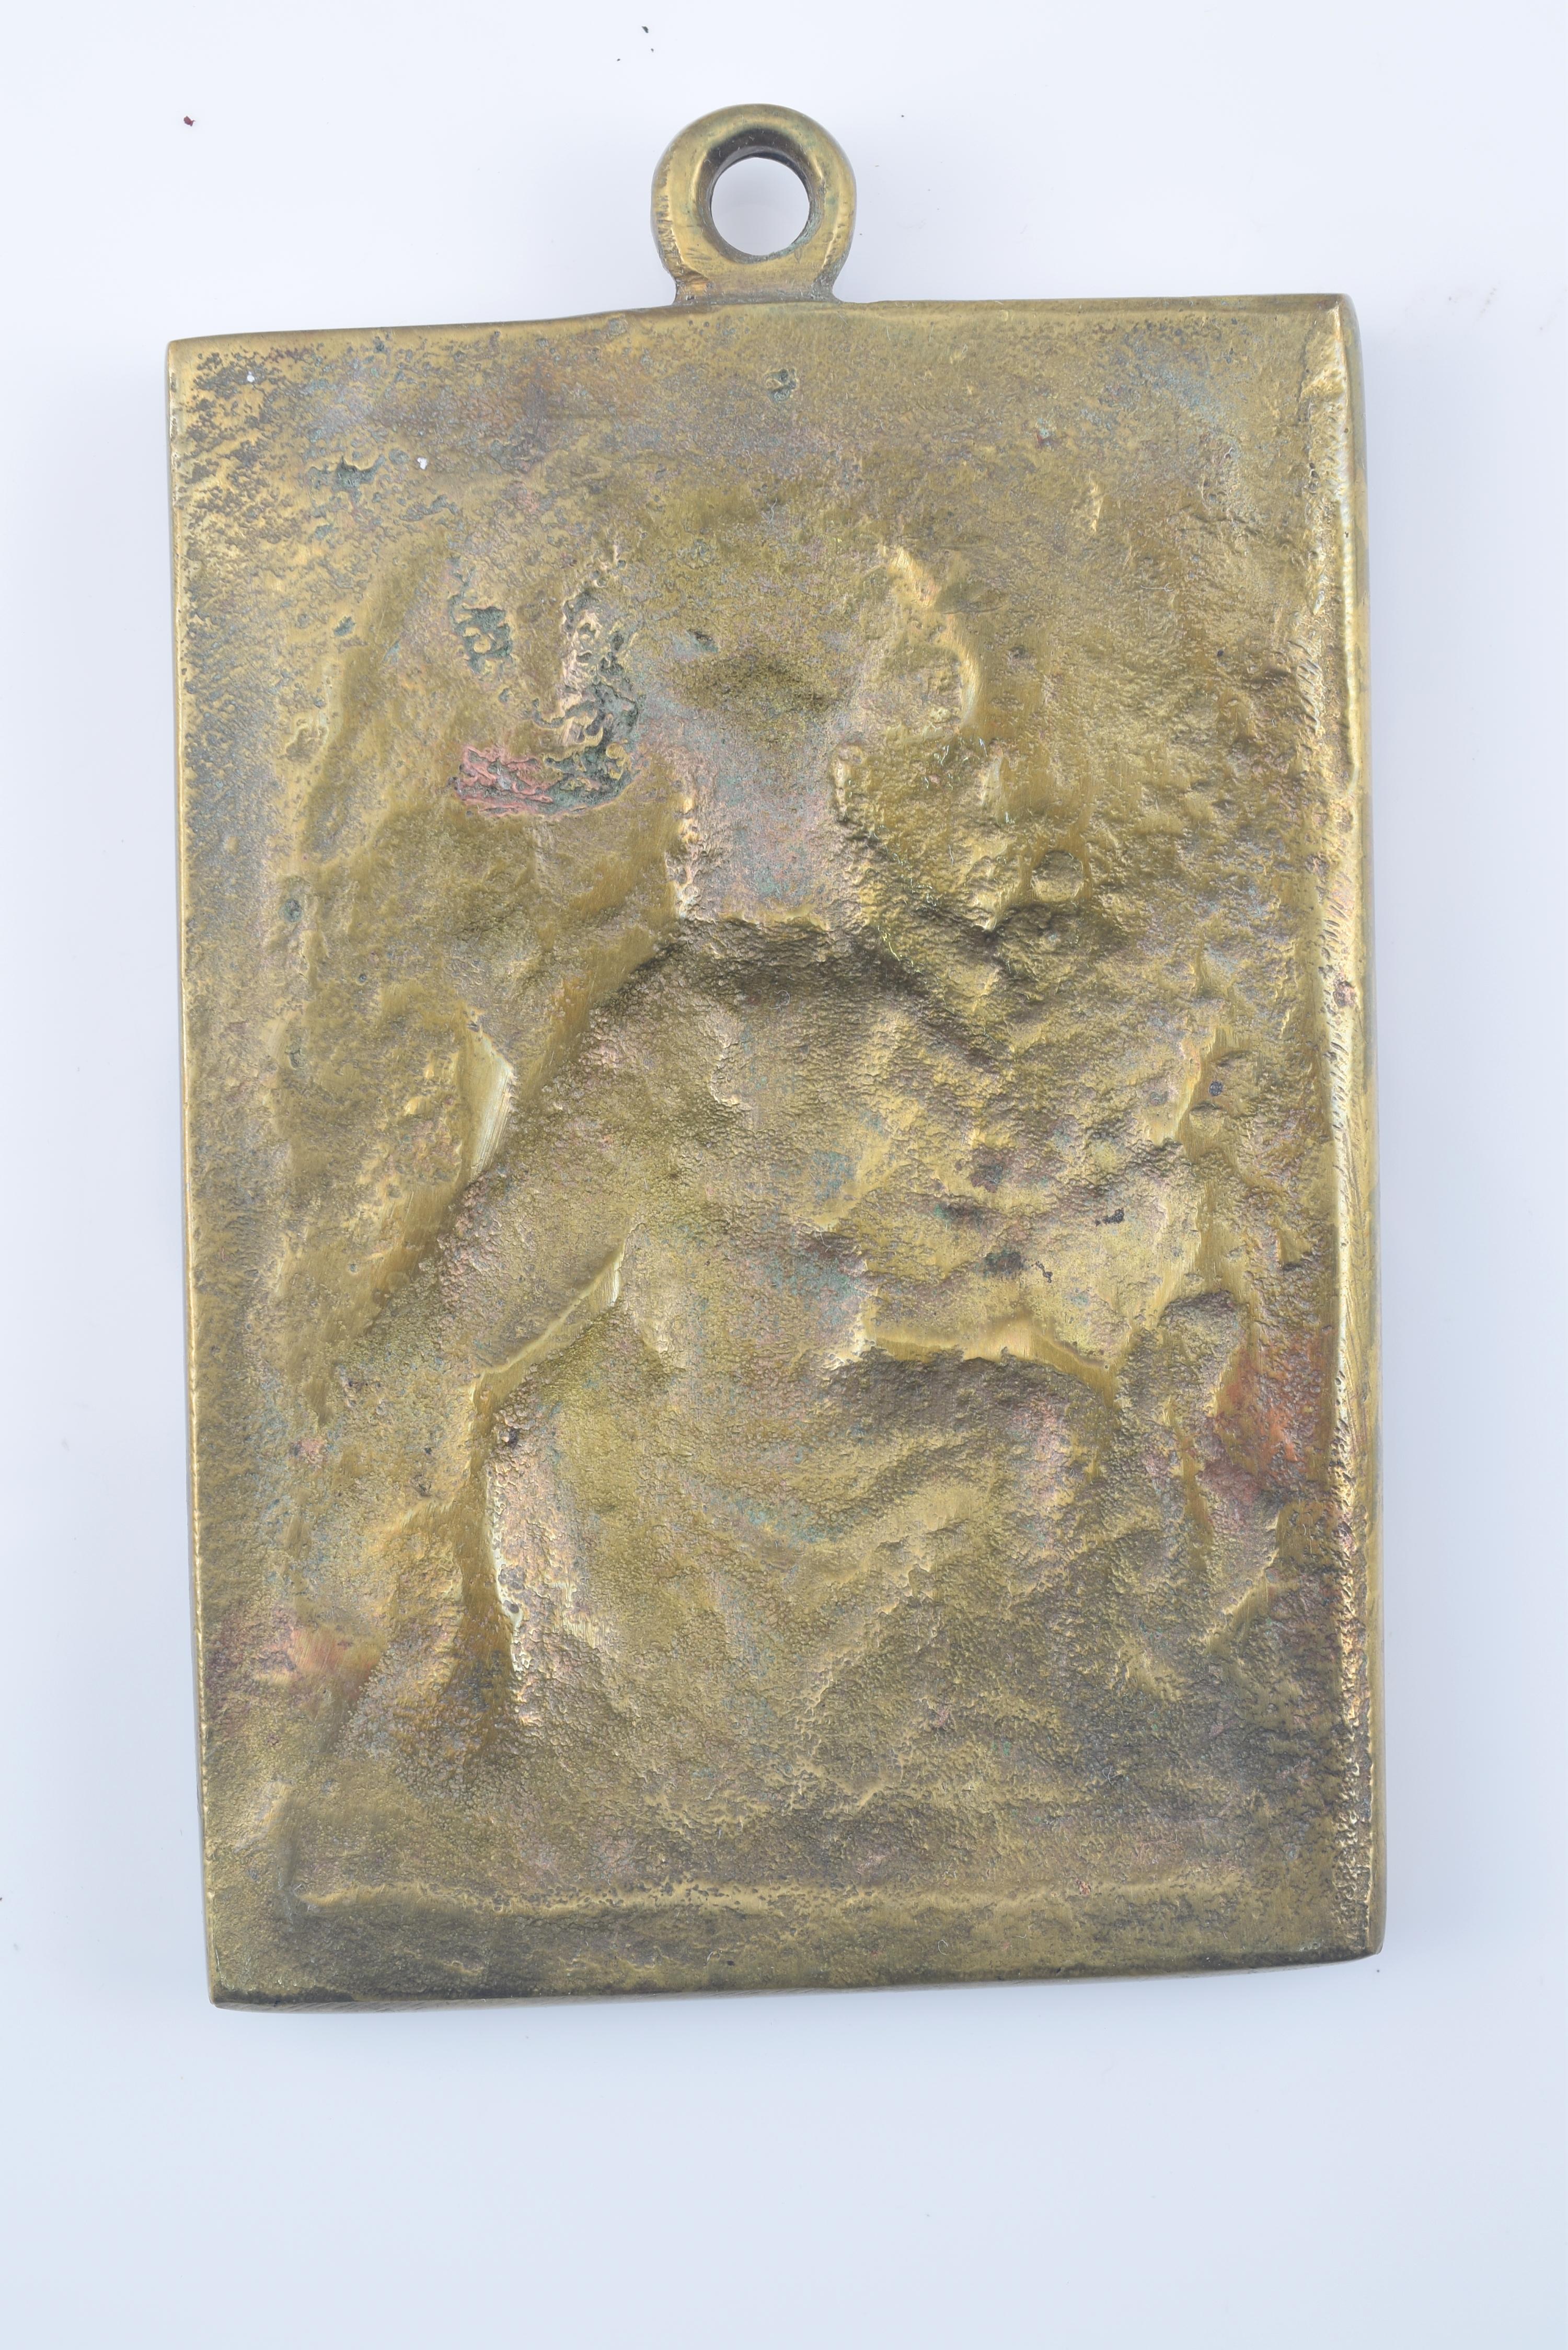 Devotional plaque, Virgin of Montserrat and the Mountain. Bronze. Spanish school, 19th century. 
Devotional plate made of bronze, with a rectangular shape, which has a washer in its upper part and a frame of moldings highlighting a figurative